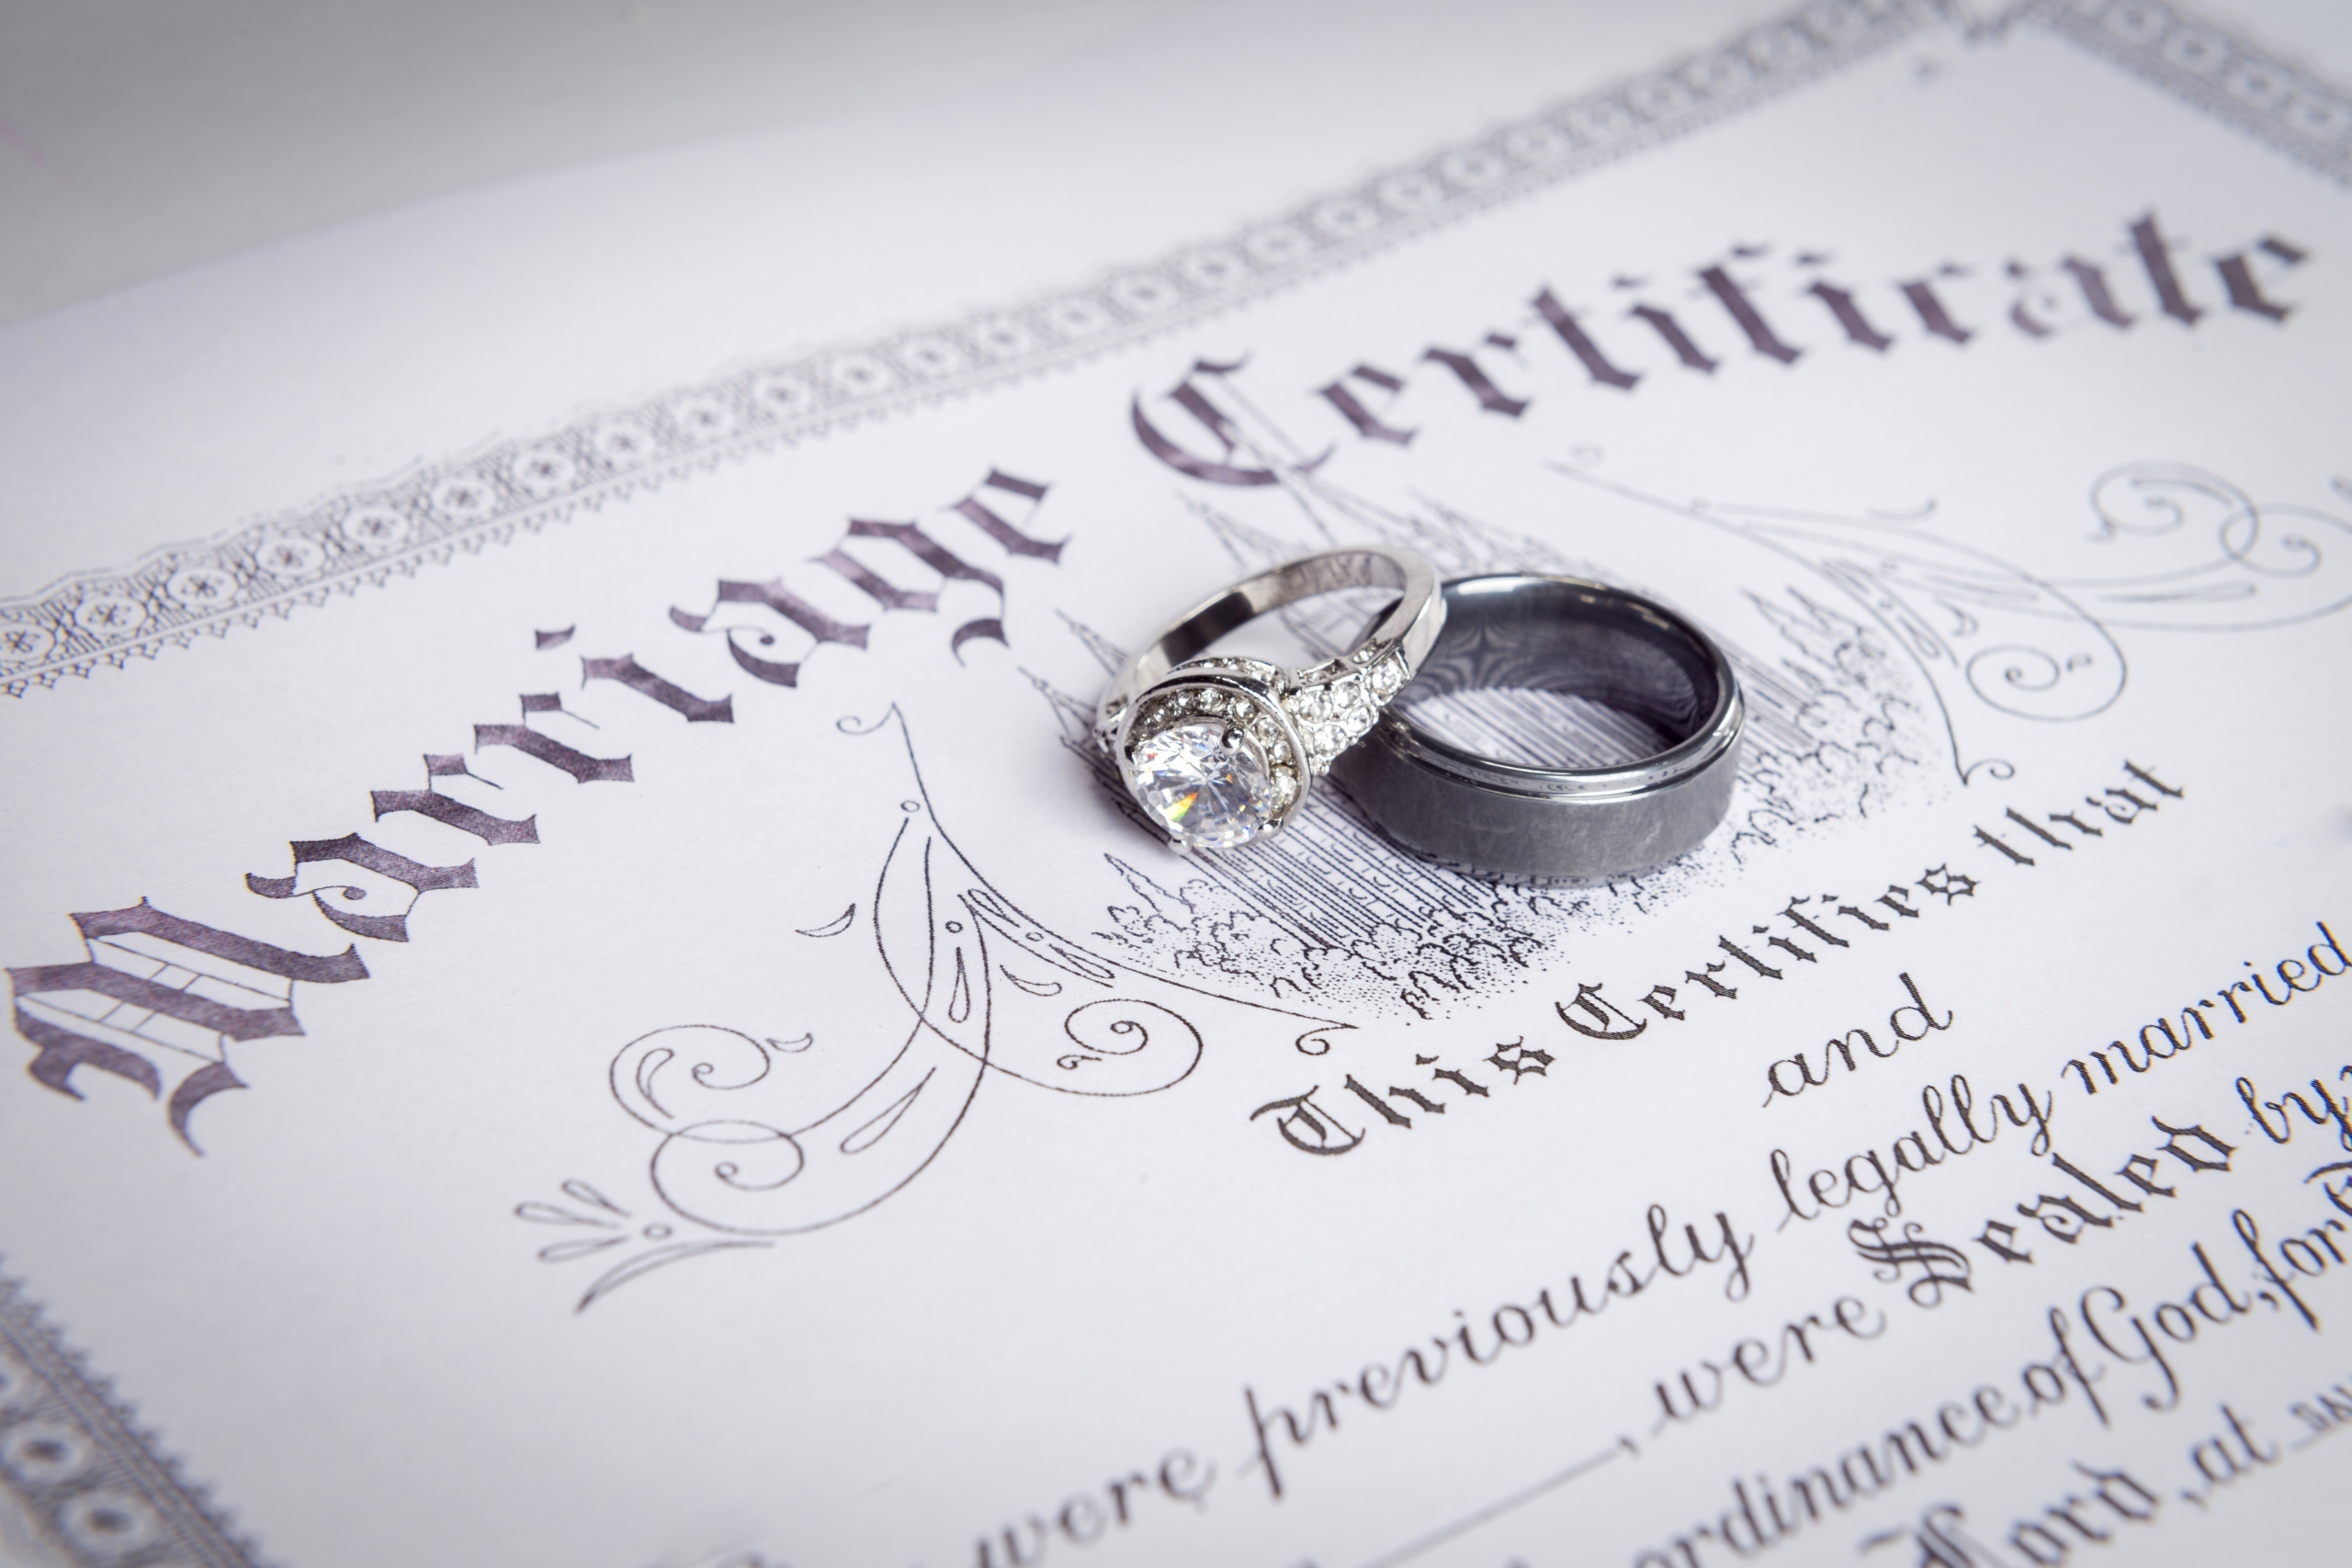 ACQUIRING TURKISH CITIZENSHIP BY MARRIAGE